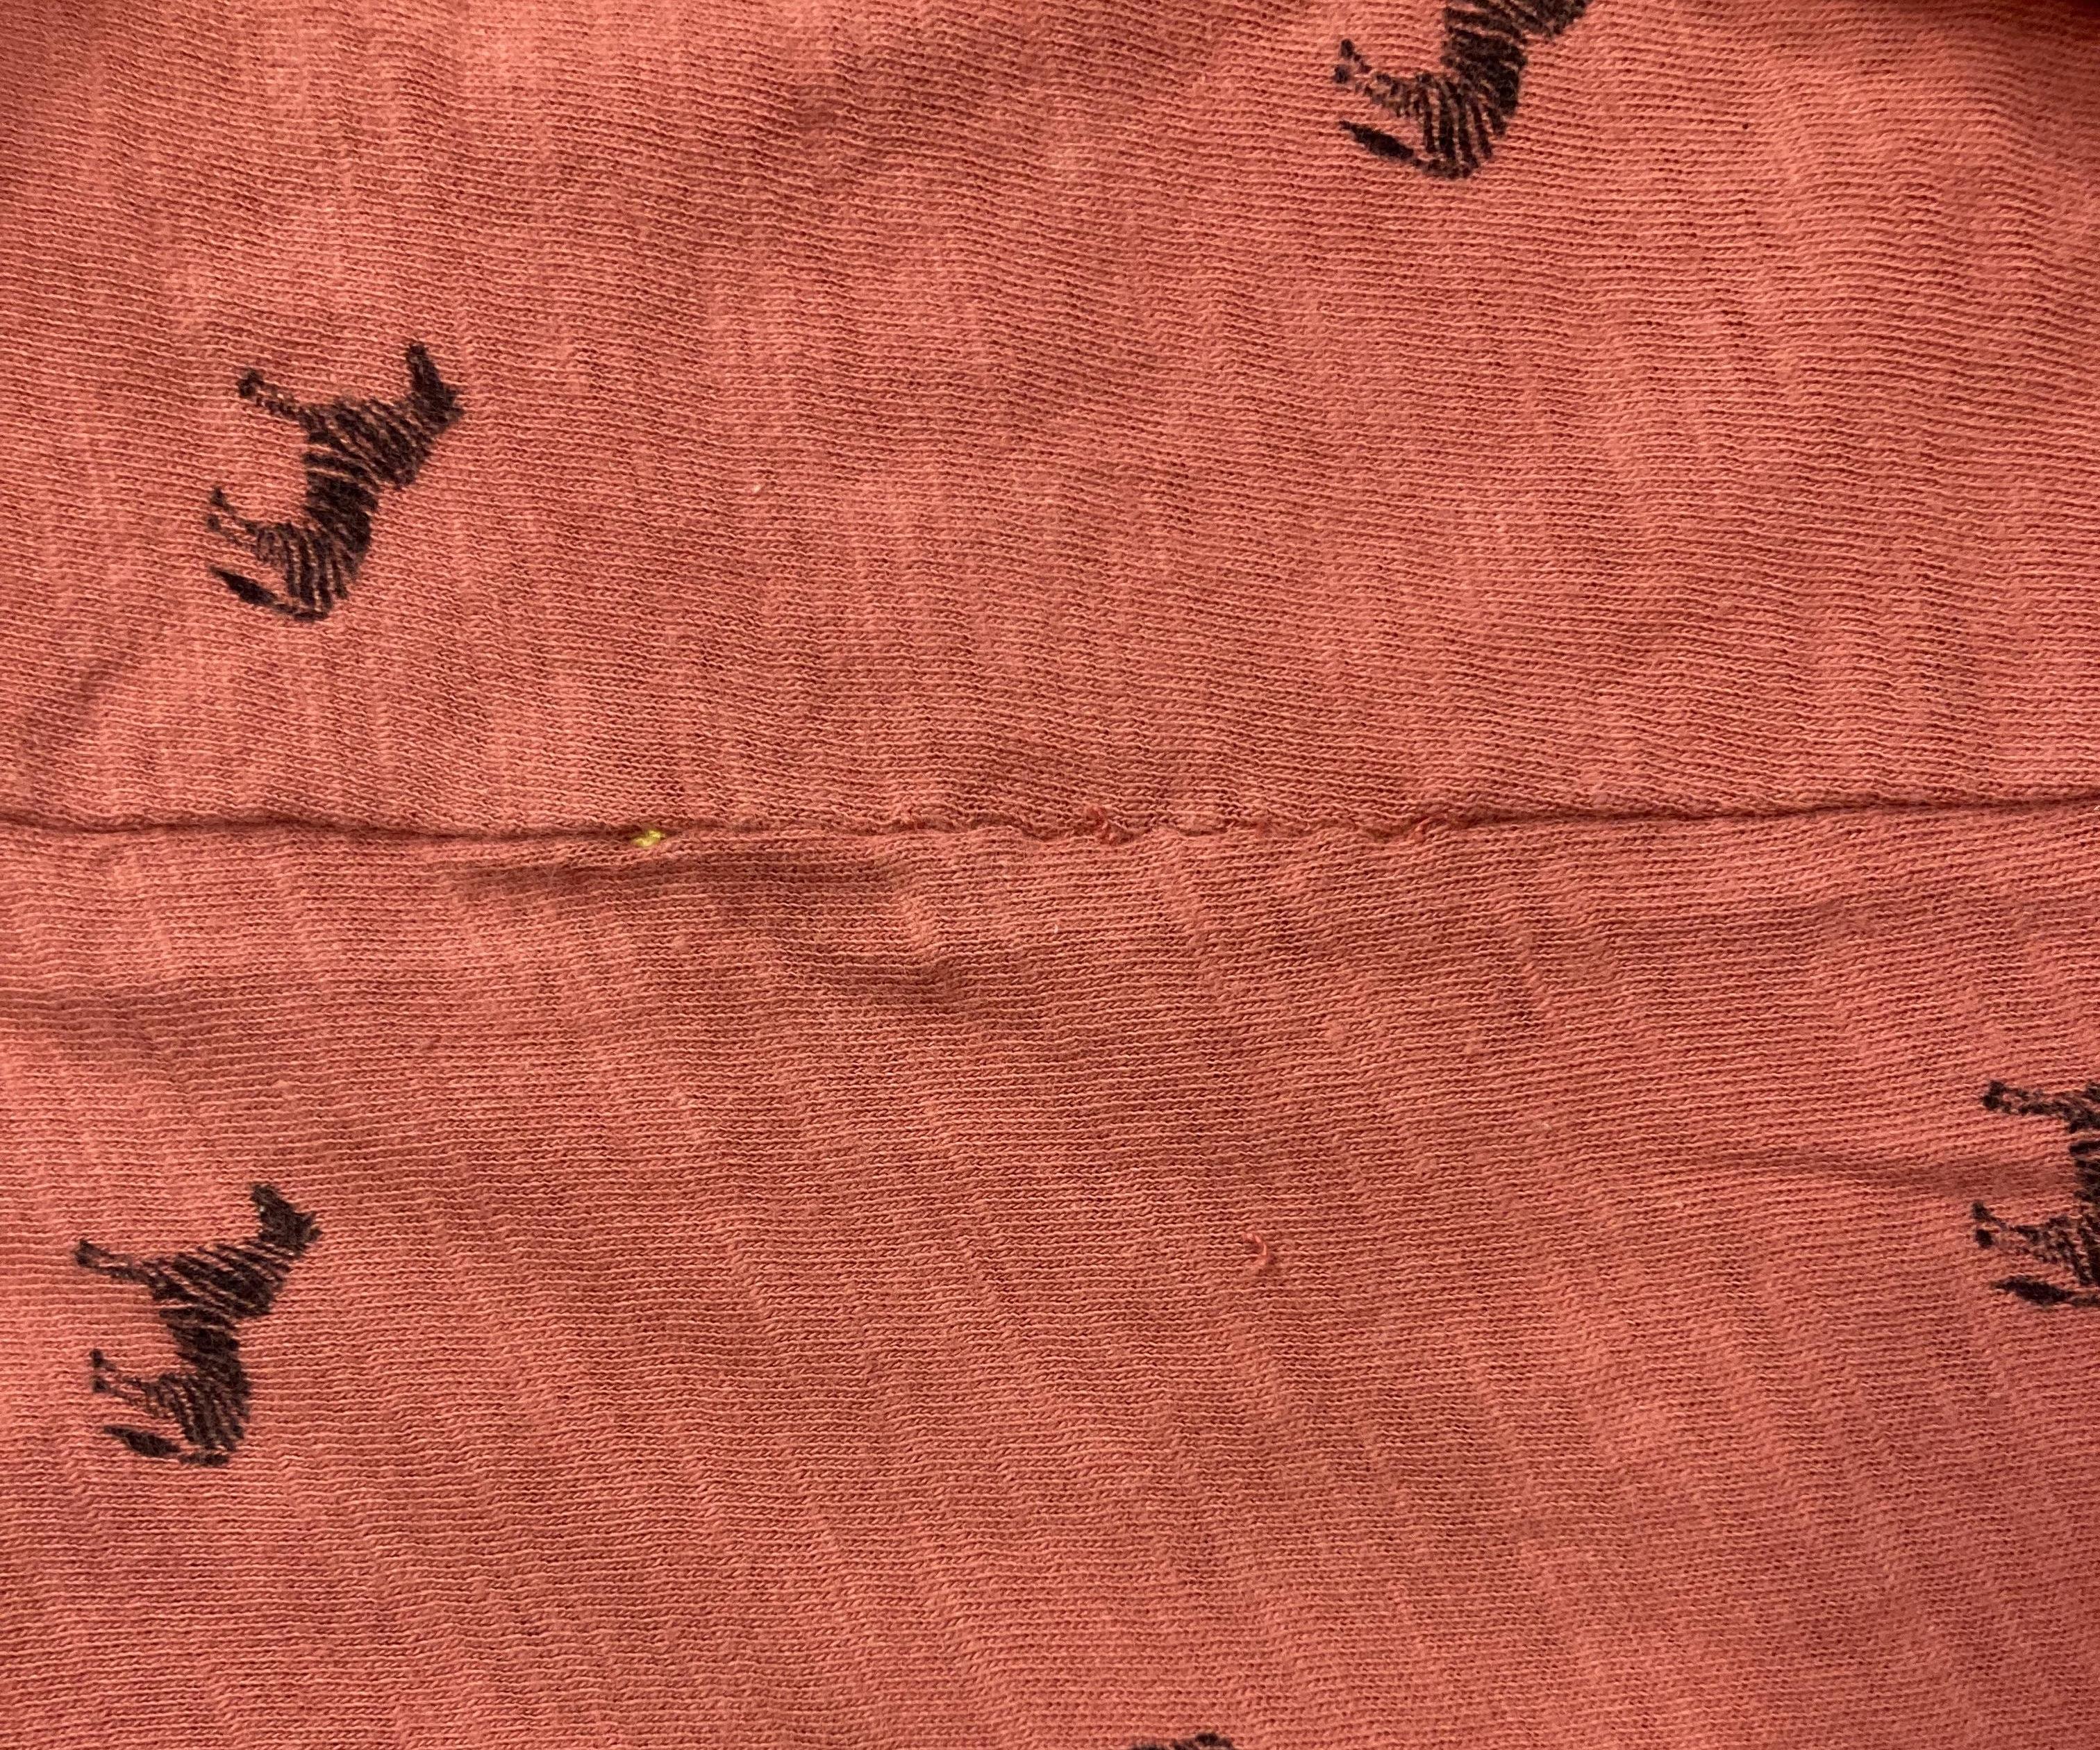 How to Invisibly Repair a Seam